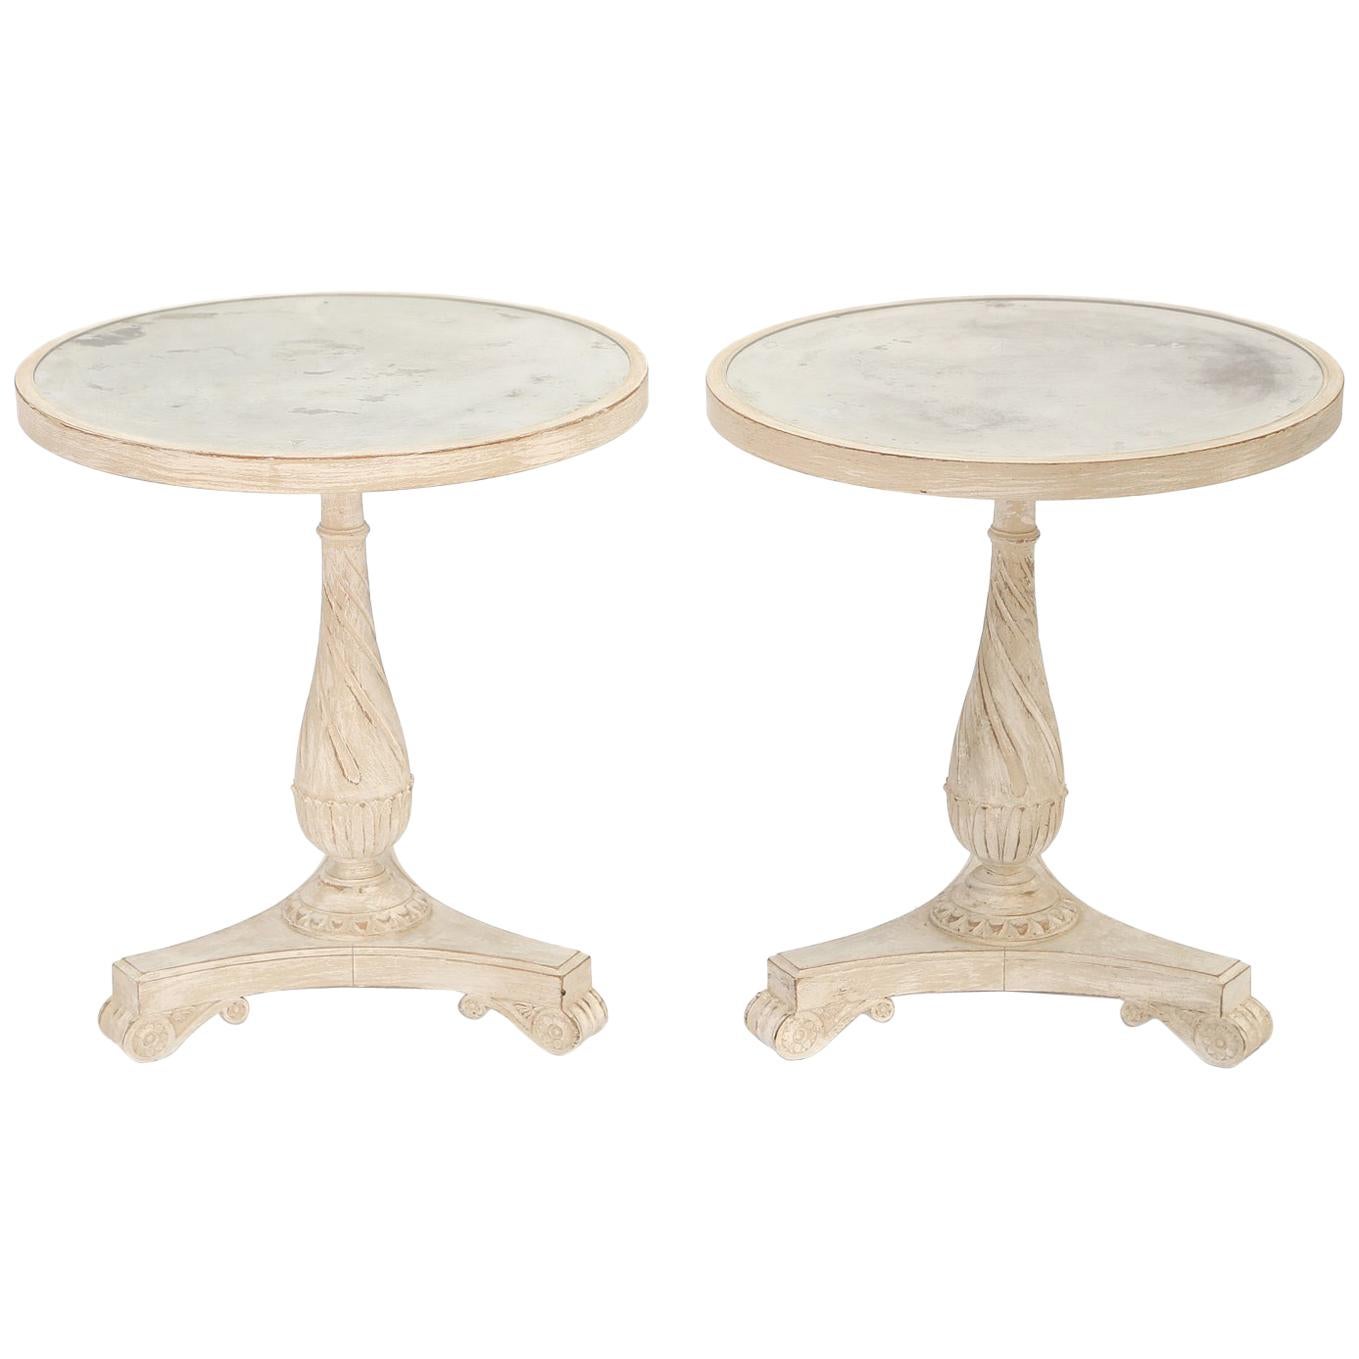 Pair of Vintage Italian Accent Tables with Mirrored Tops